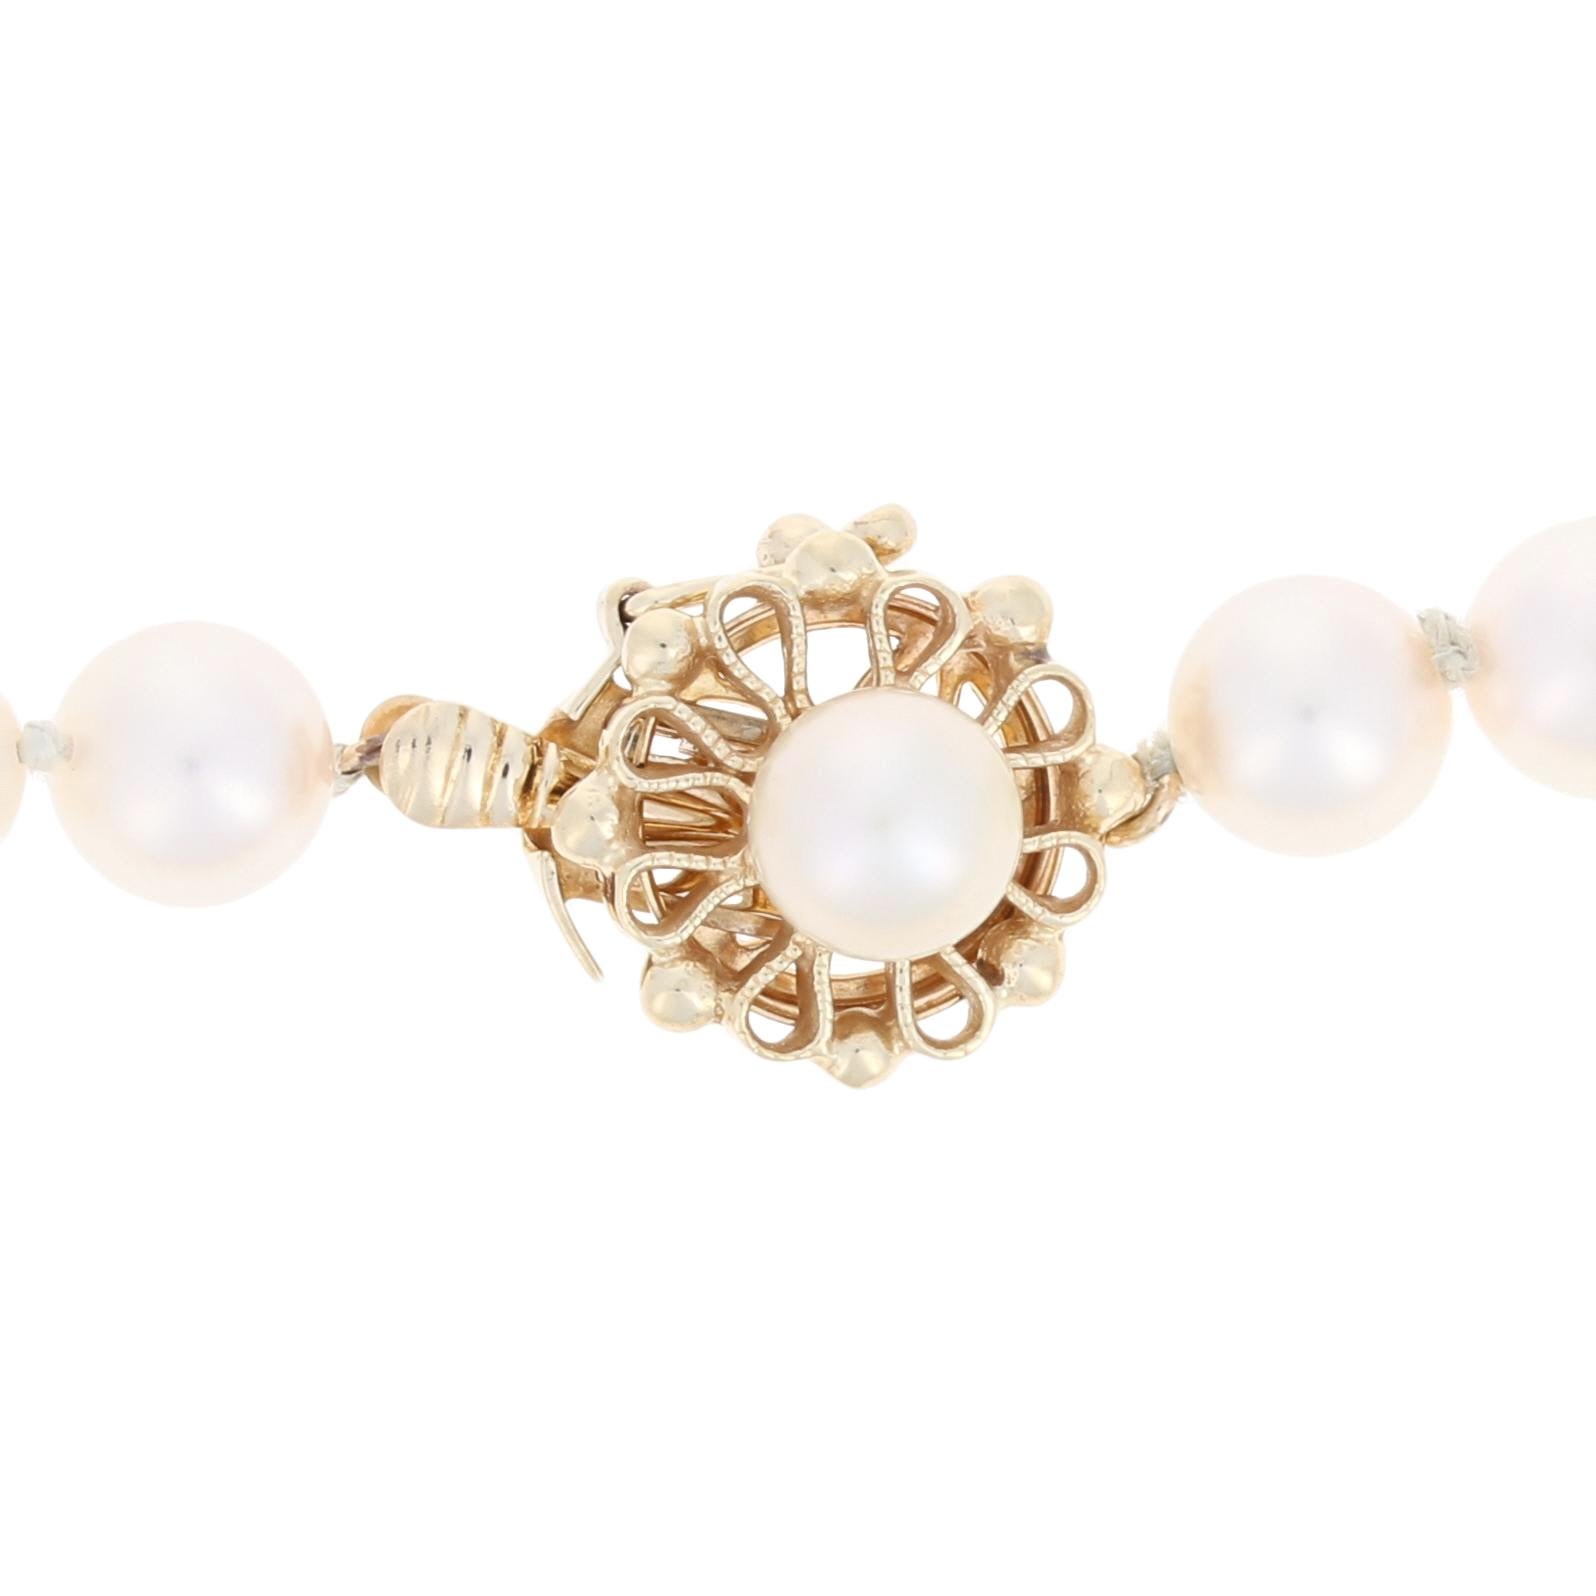 Bead Akoya Pearl Necklace, 14k Yellow Gold Clasp Single Knotted Strand